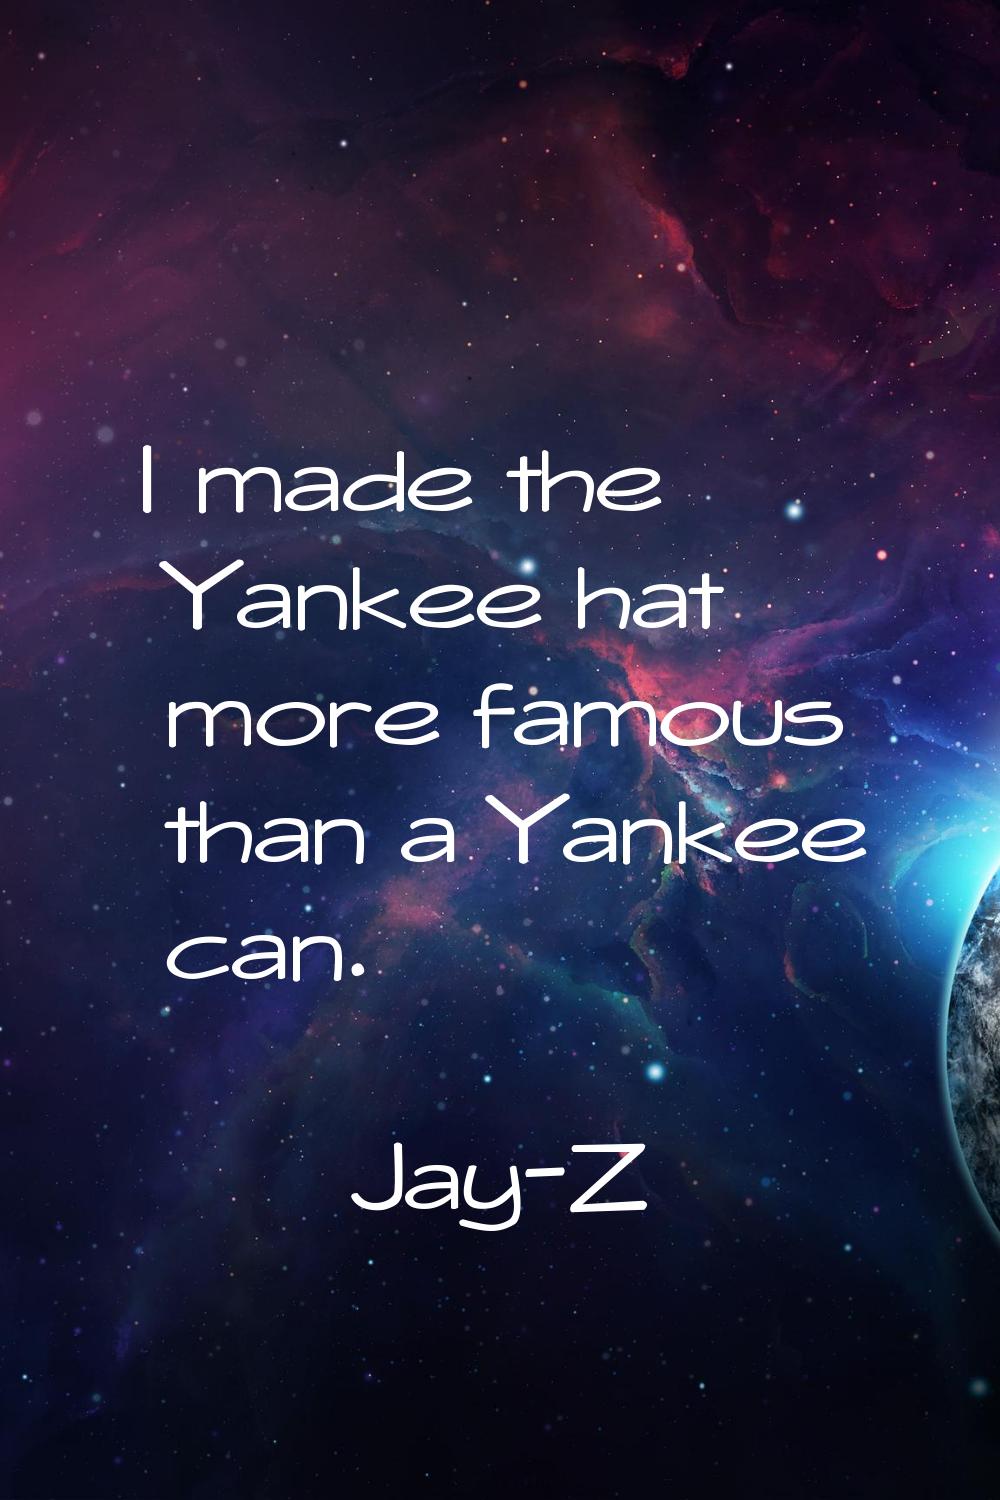 I made the Yankee hat more famous than a Yankee can.